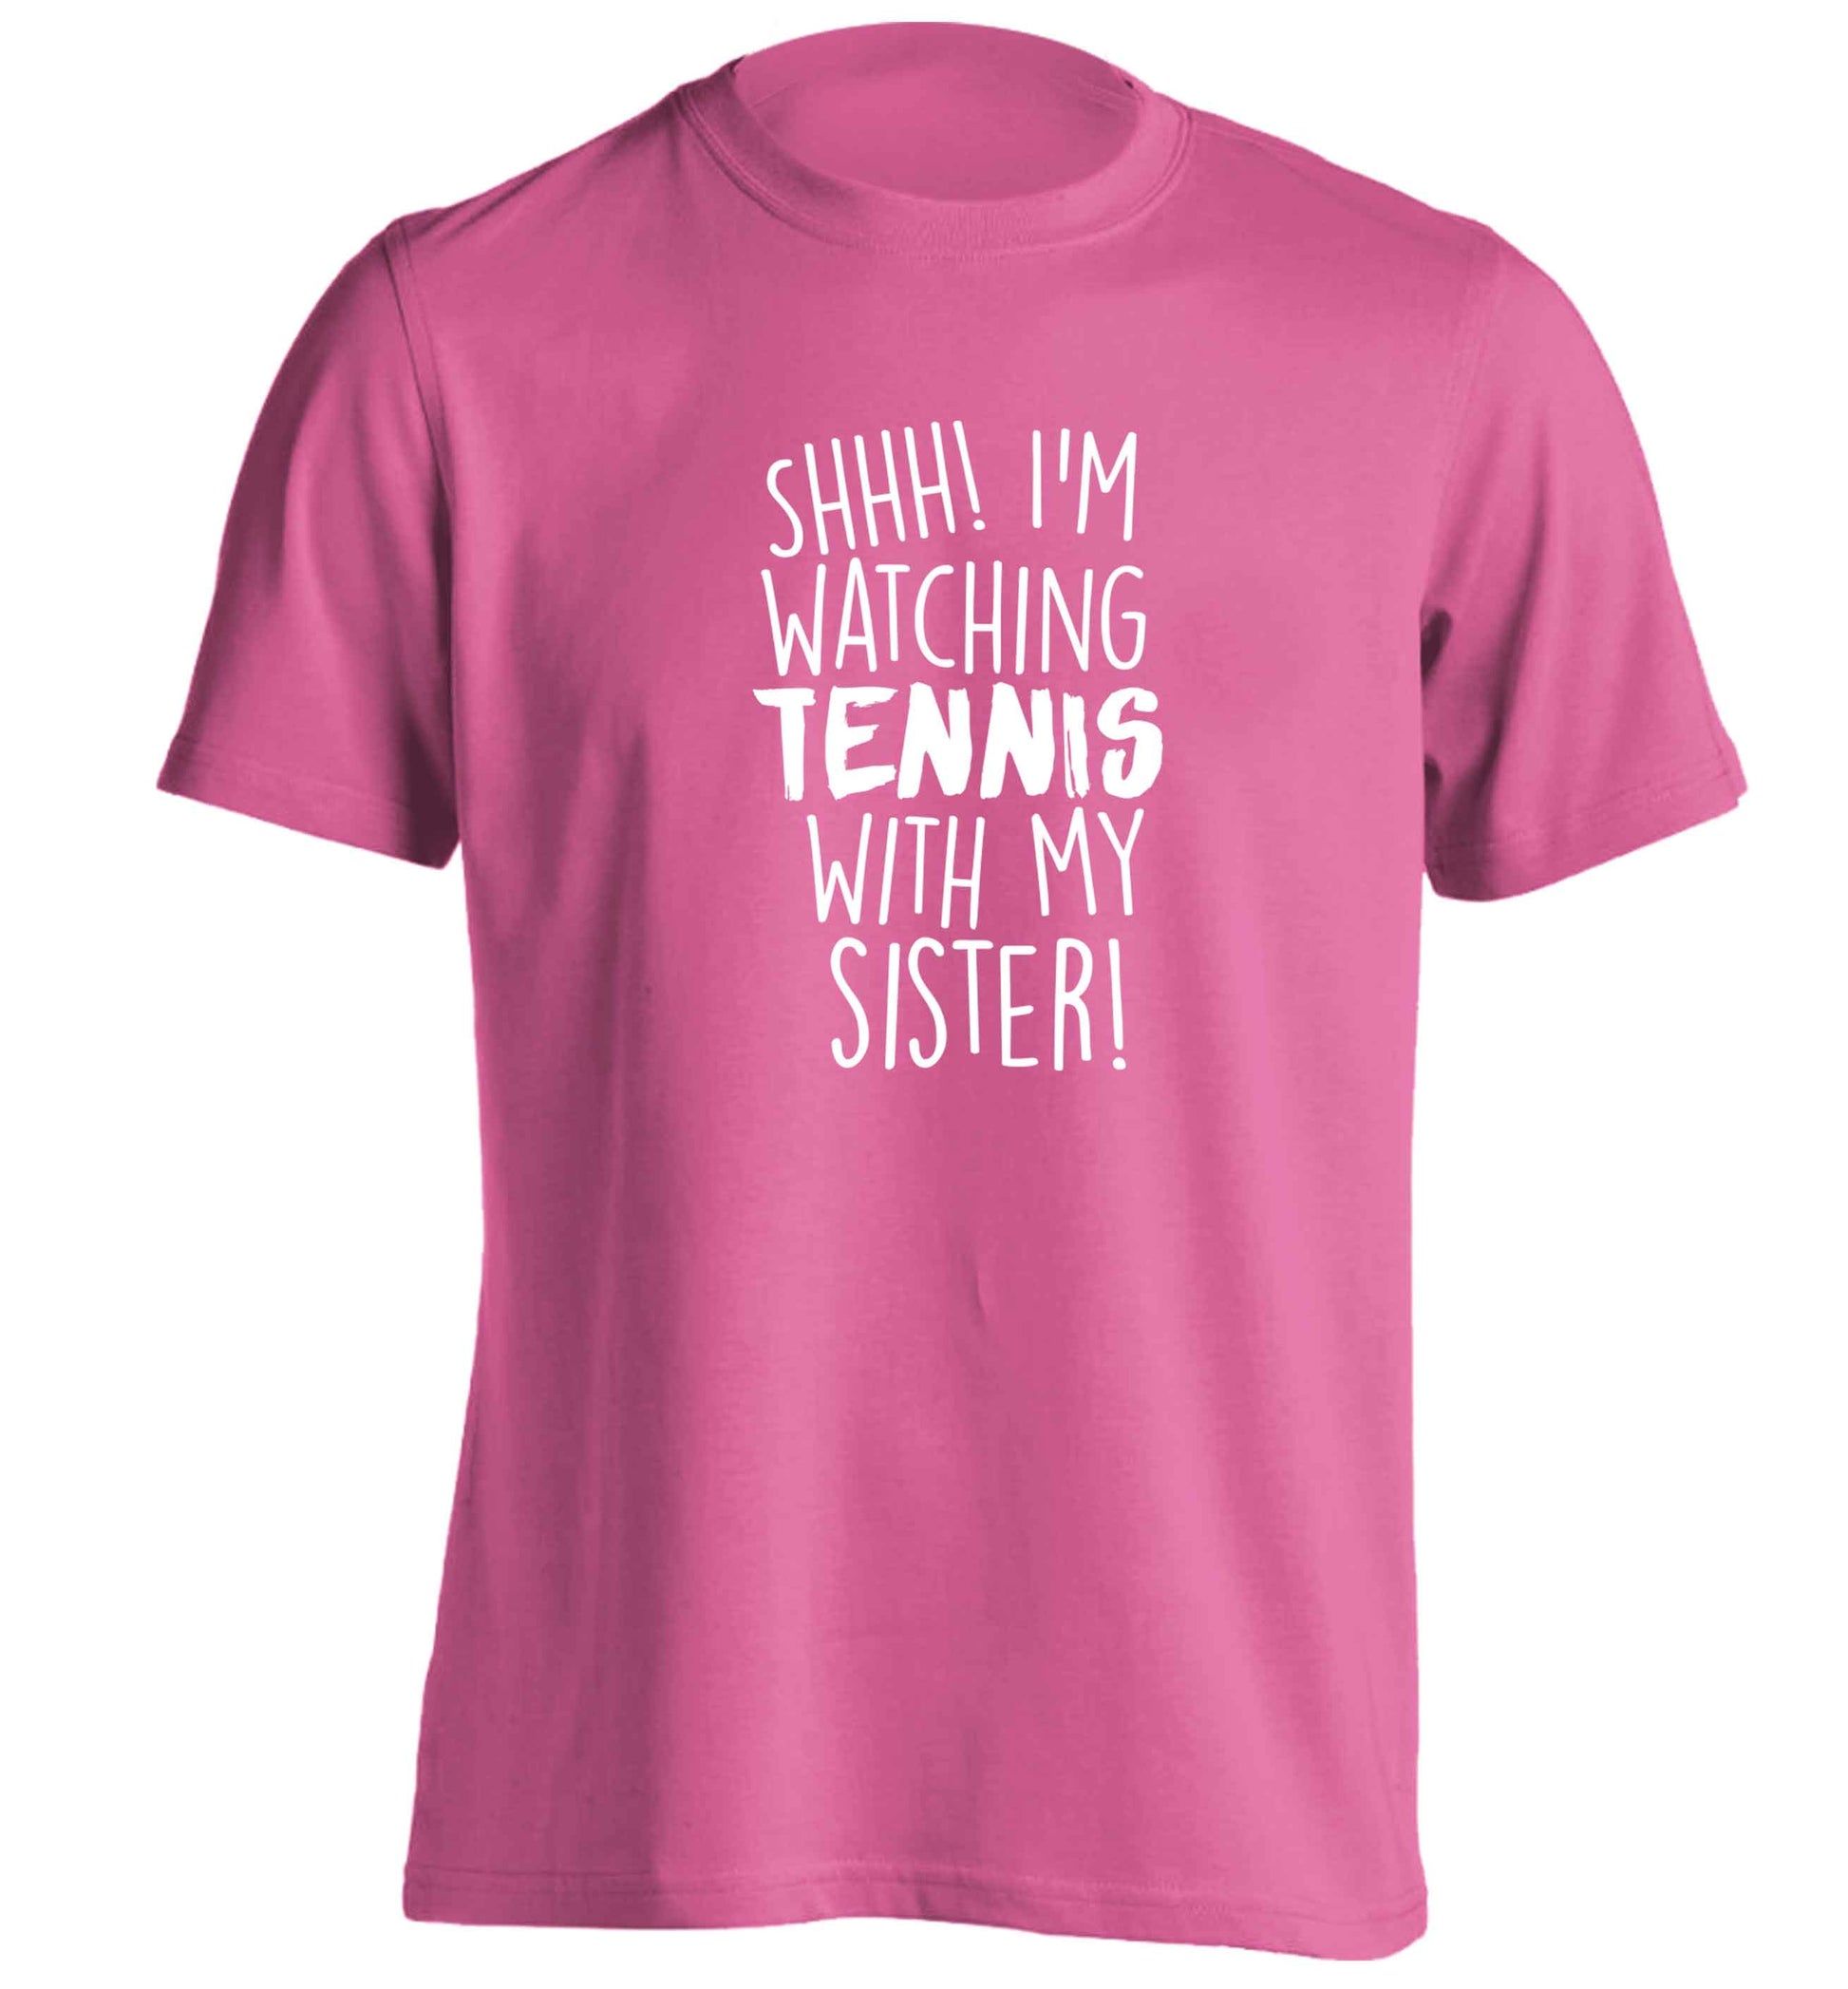 Shh! I'm watching tennis with my sister! adults unisex pink Tshirt 2XL